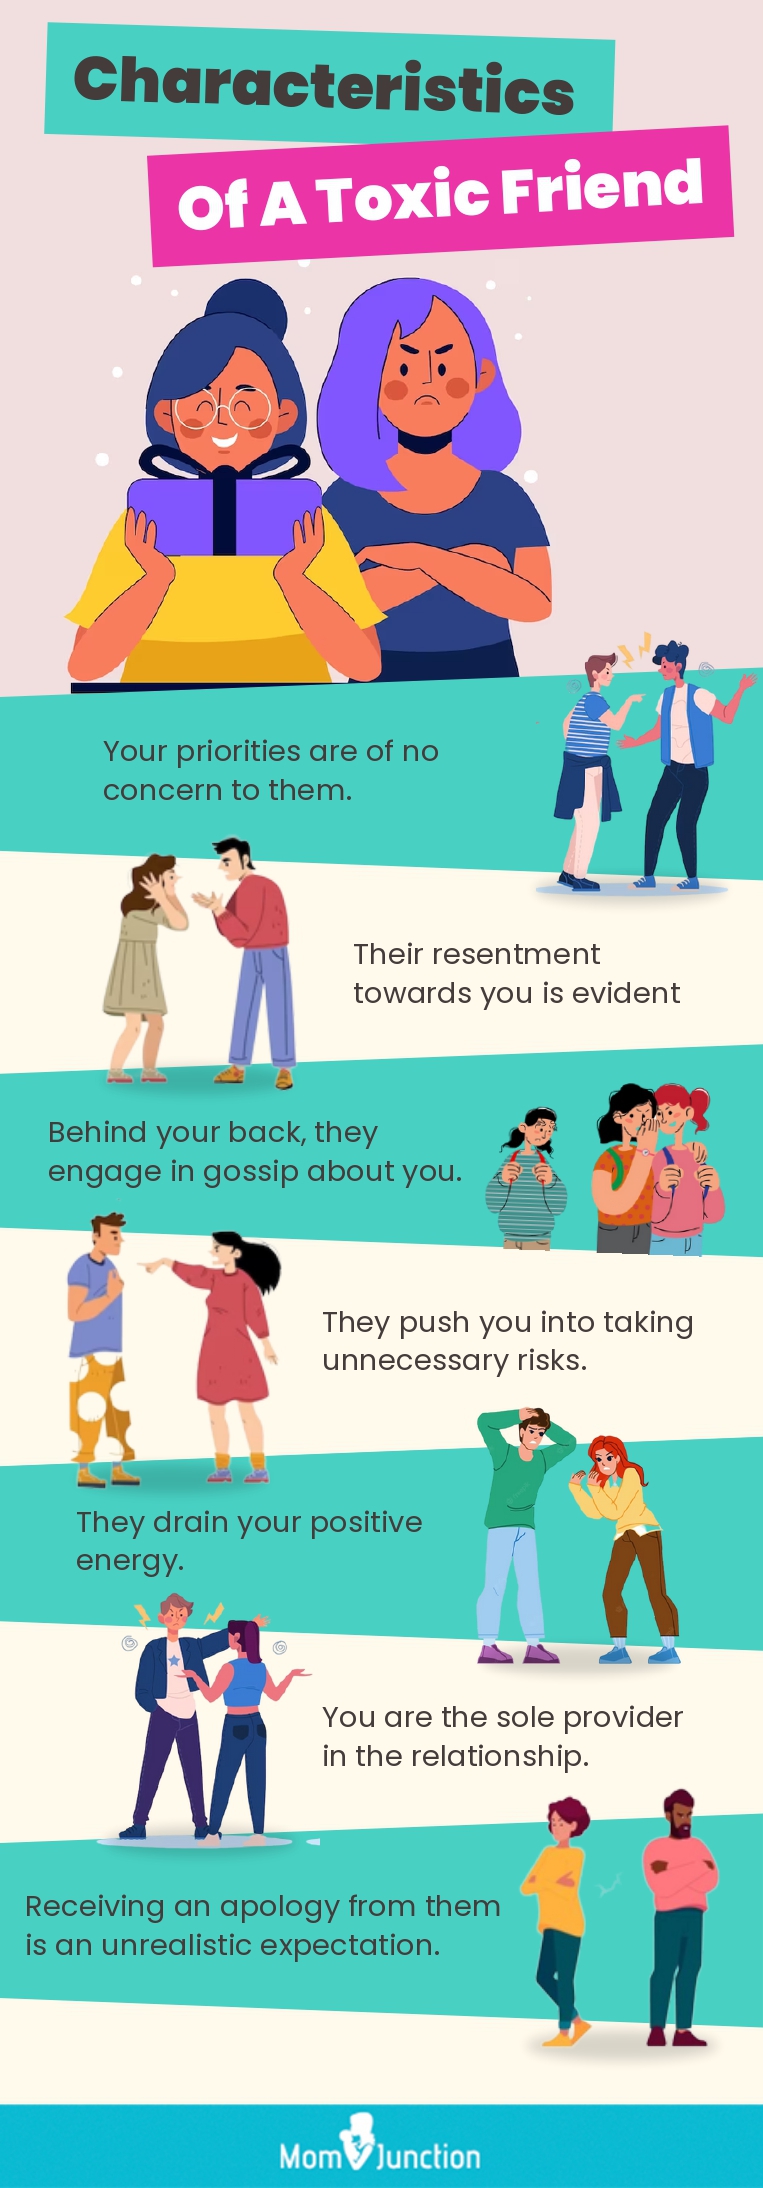 Are you in healthy friendships? - Aspire